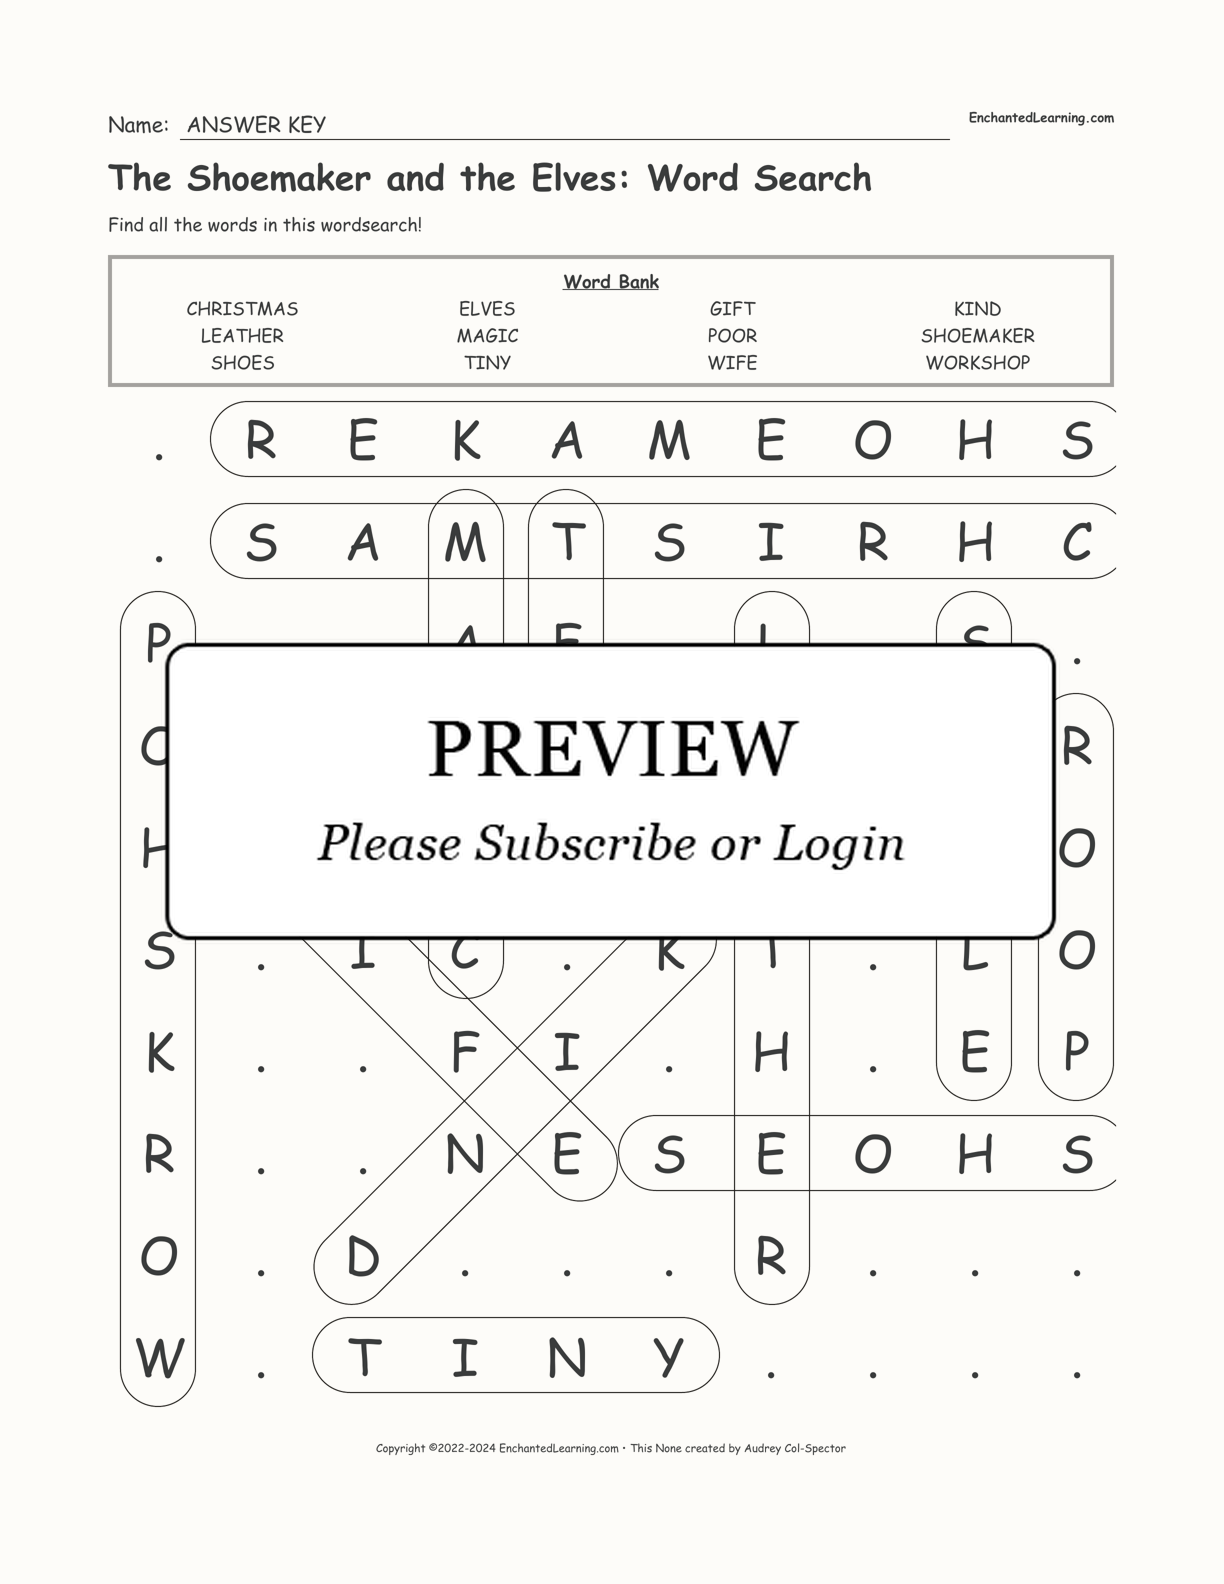 The Shoemaker and the Elves: Word Search interactive worksheet page 2